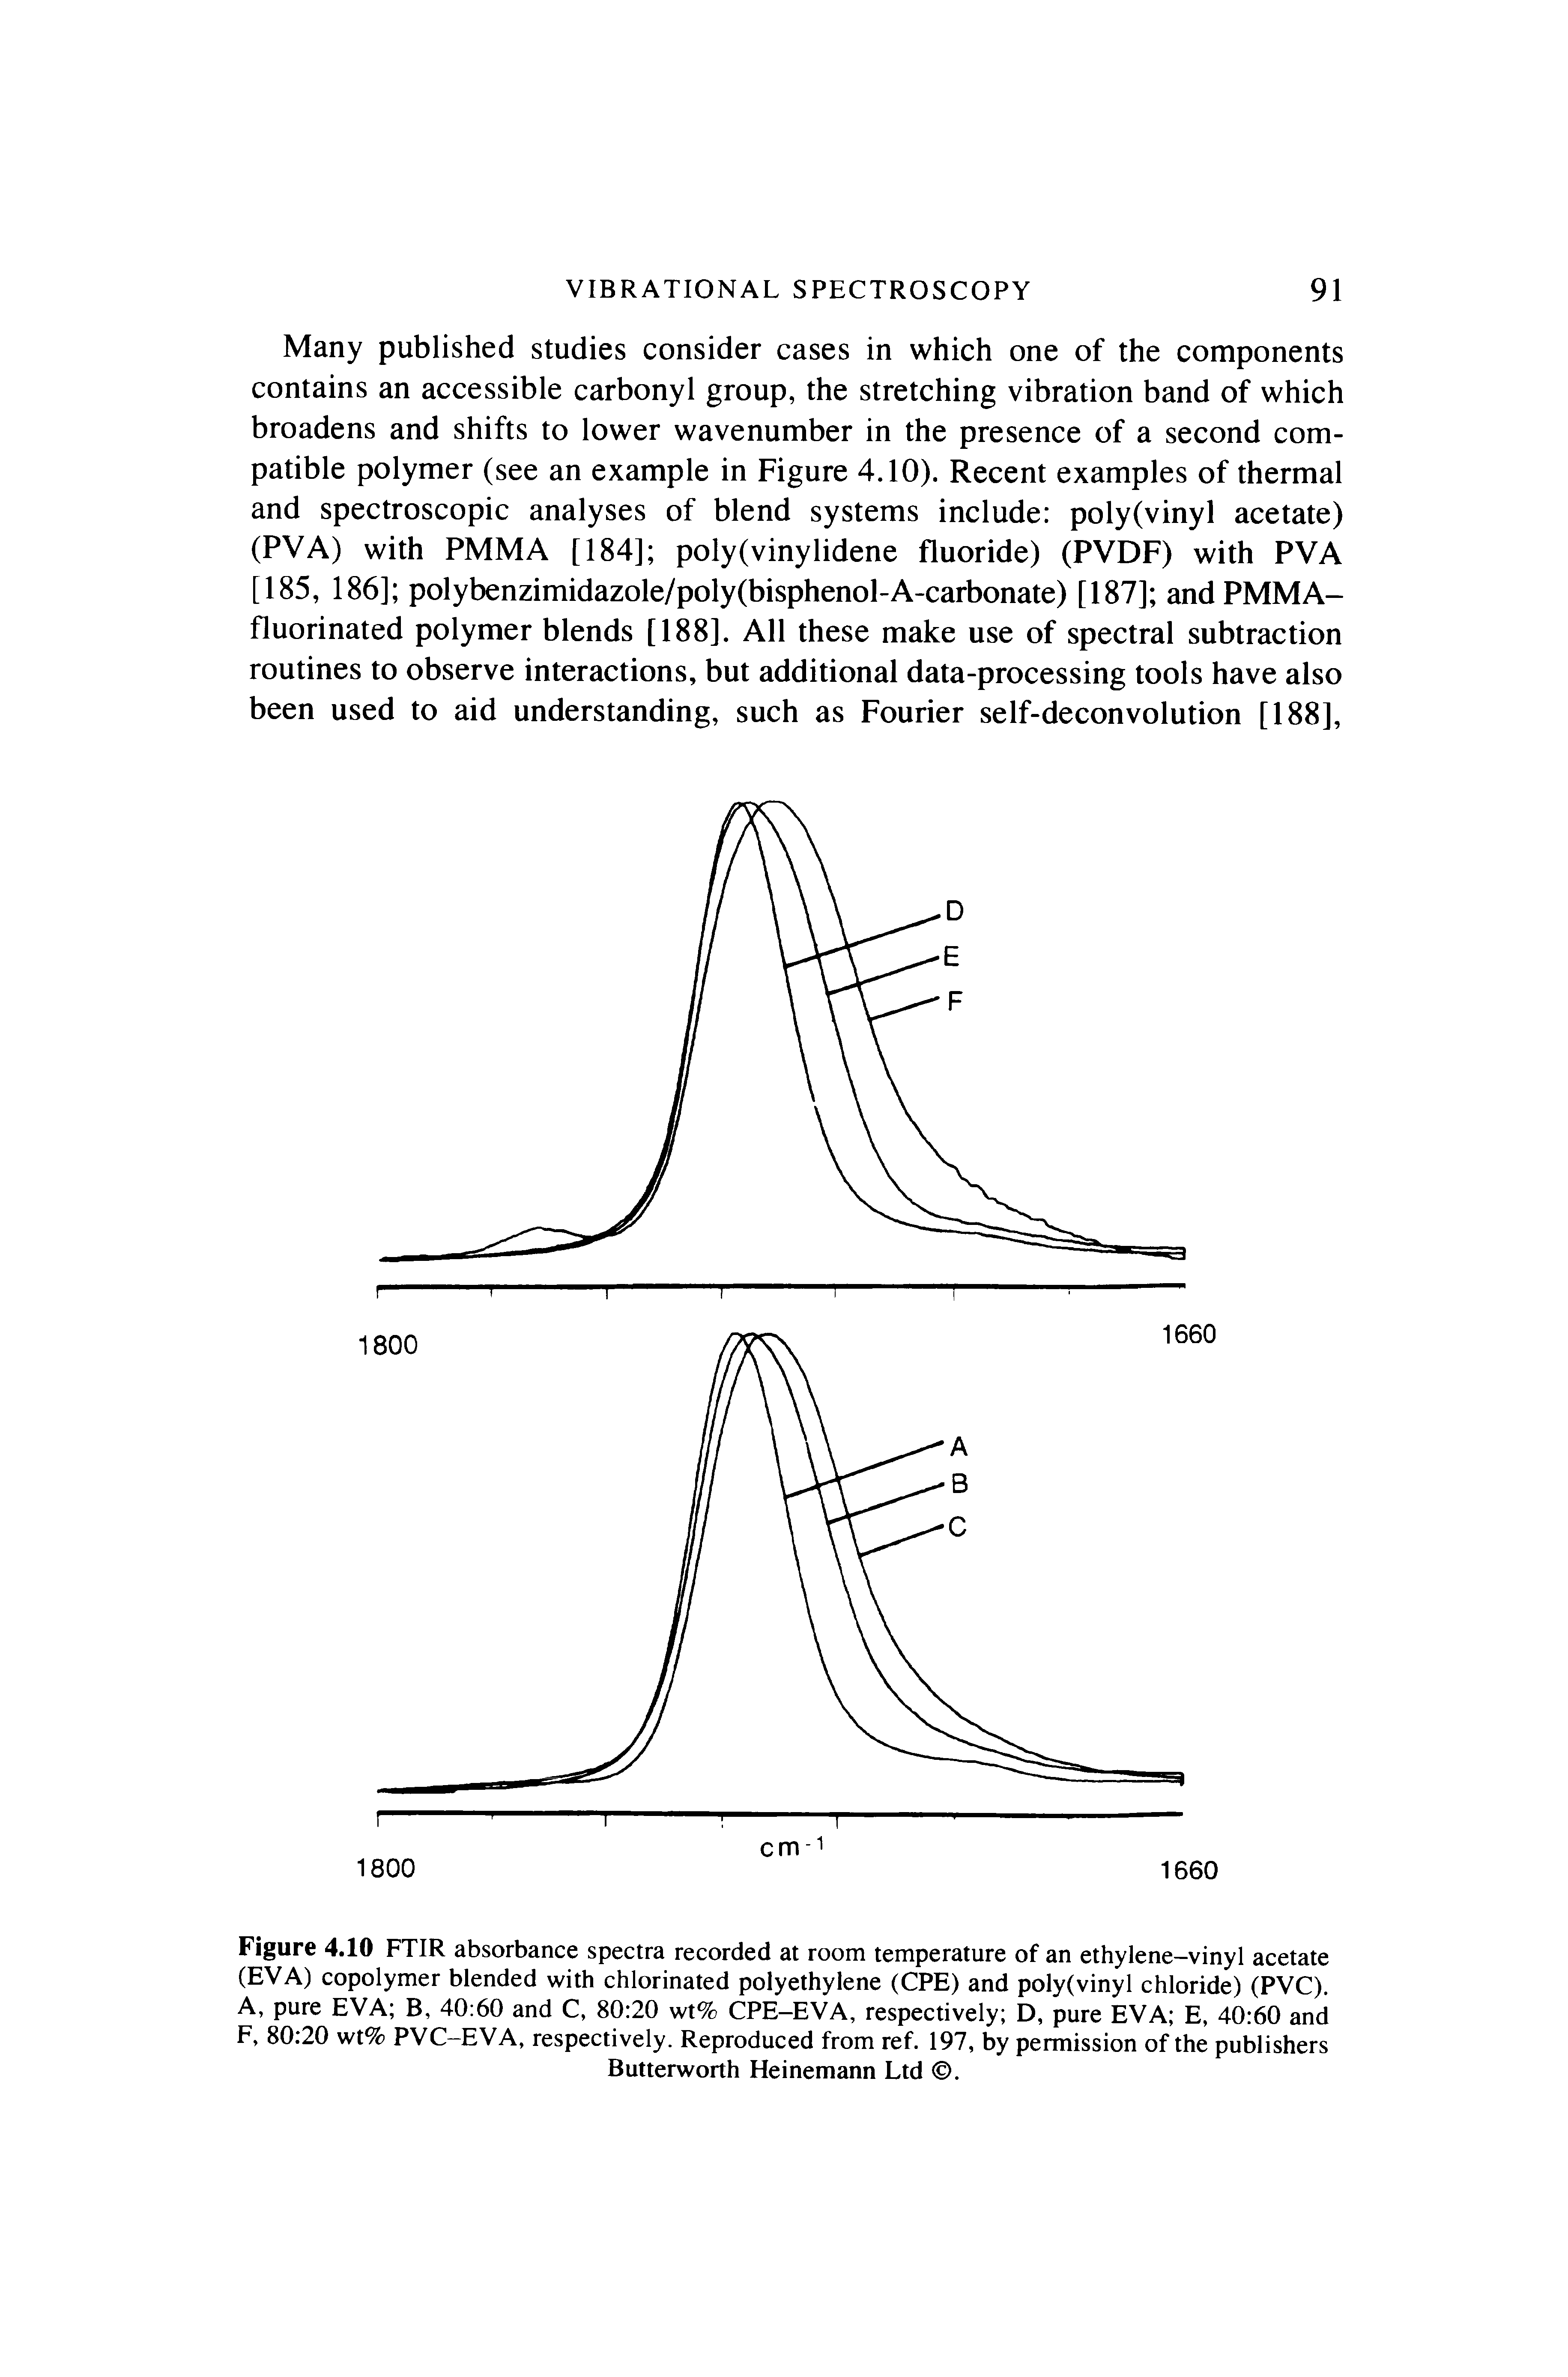 Figure 4.10 FTIR absorbance spectra recorded at room temperature of an ethylene-vinyl acetate (EVA) copolymer blended with chlorinated polyethylene (CPE) and poly(vinyl chloride) (PVC). A, pure EVA B, 40 60 and C, 80 20 wt% CPE-EVA, respectively D, pure EVA E, 40 60 and F, 80 20 wt% PVC-EVA, respectively. Reproduced from ref. 197, by permission of the publishers Butterworth Heinemann Ltd .